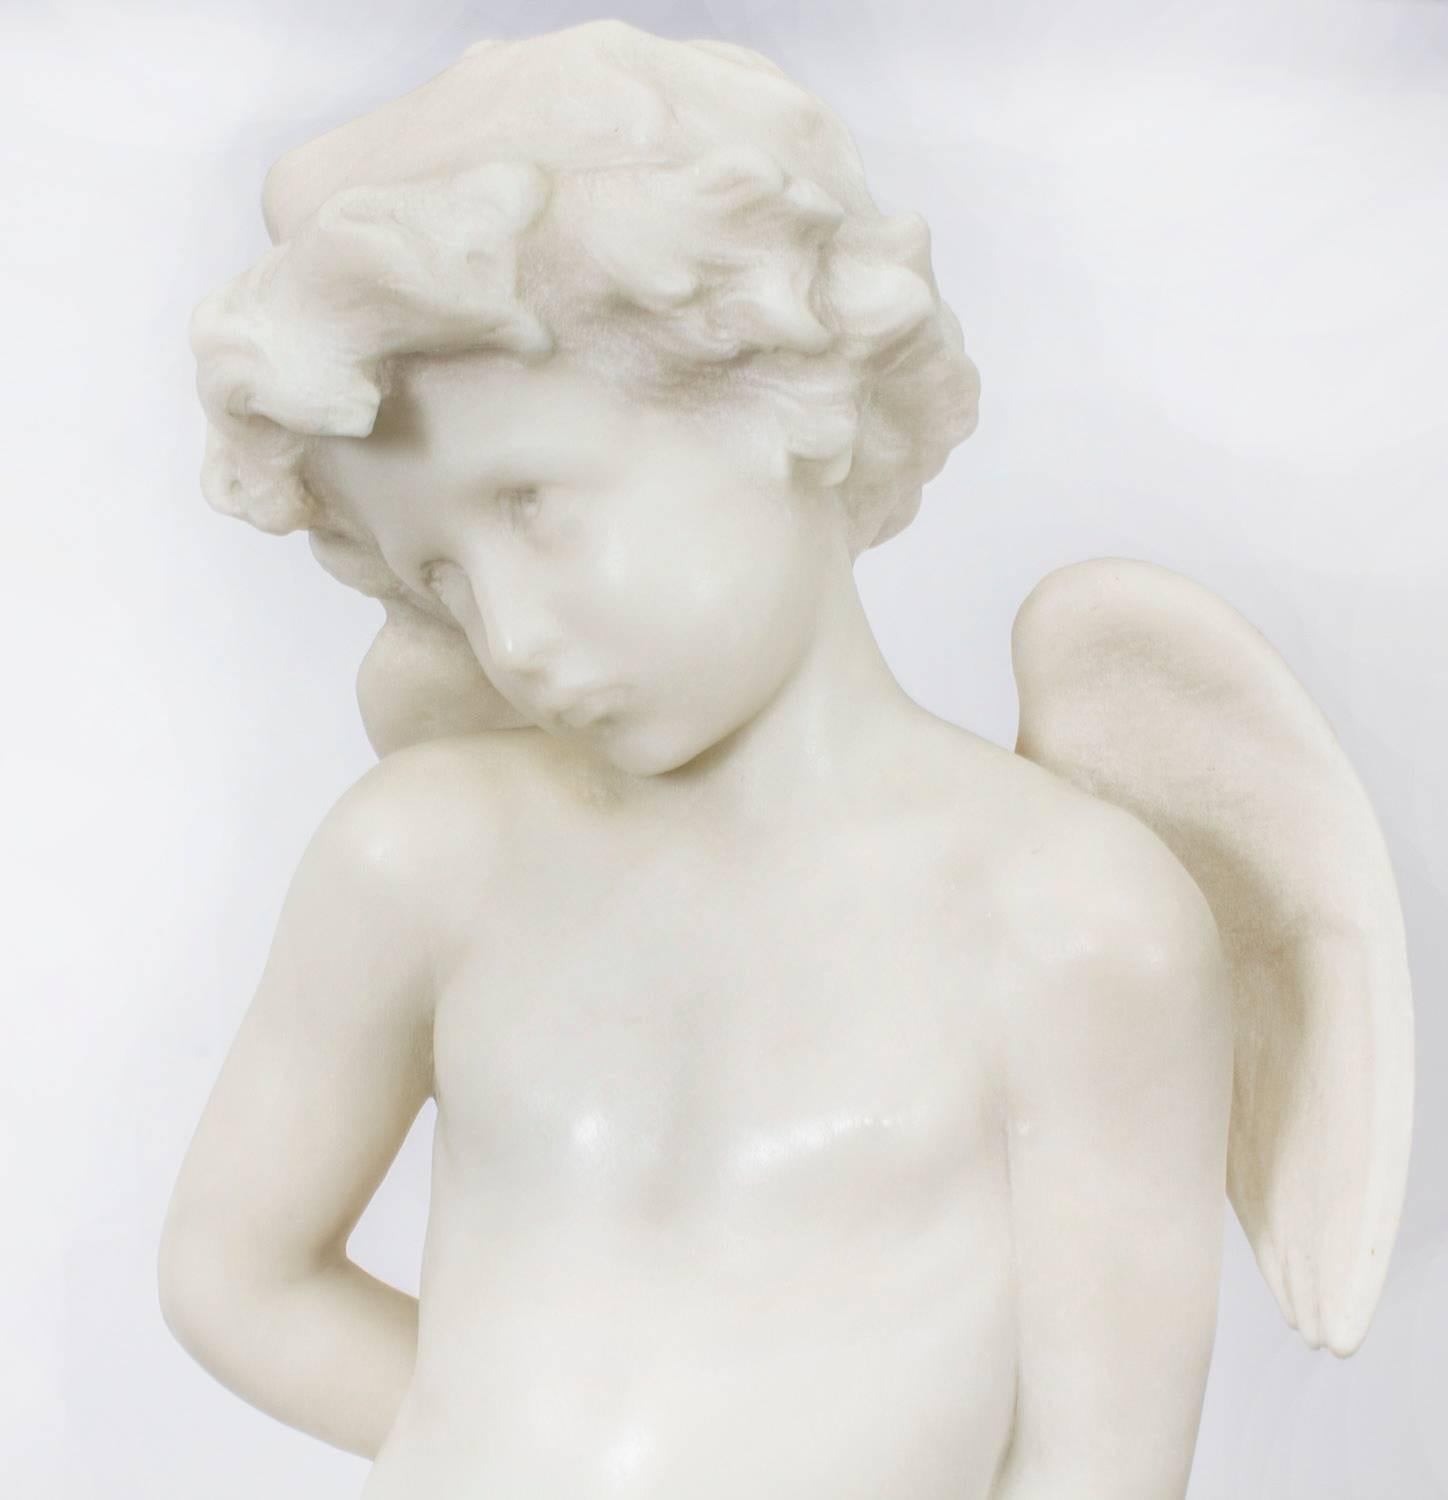 19th Century Antique French Marble Sculpture and Pedestal by Delavigne, circa 1890